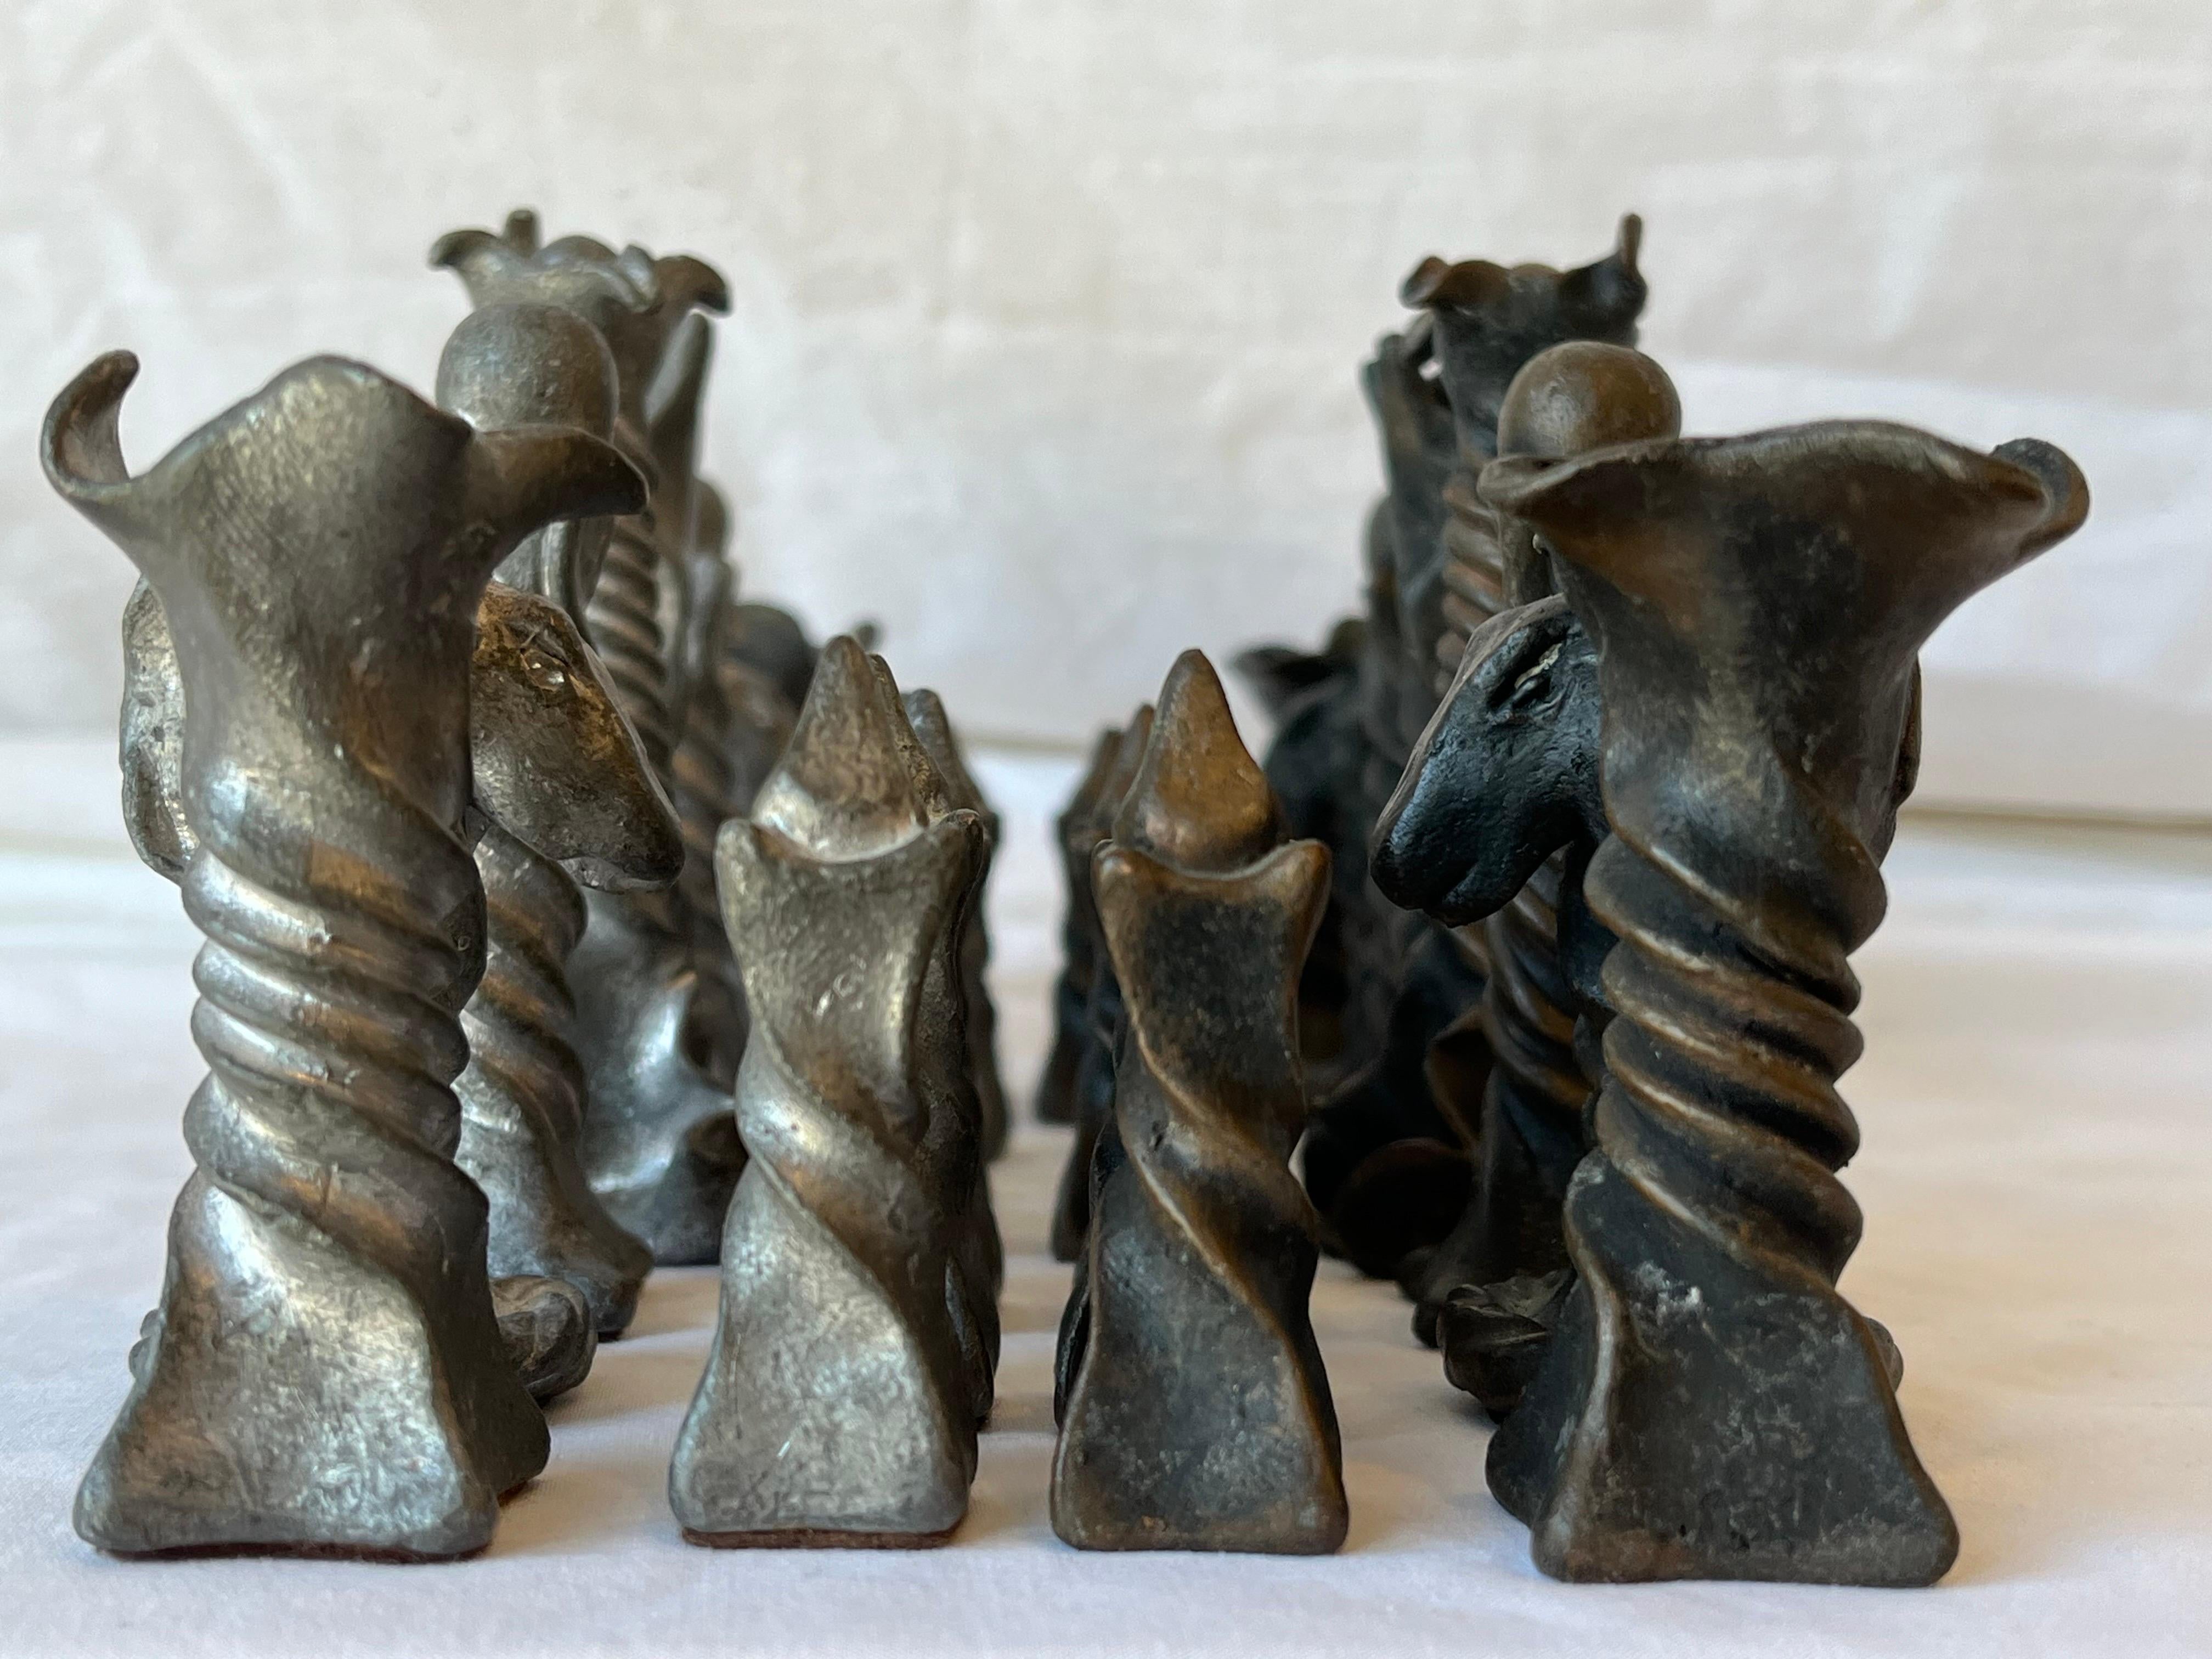 Vintage Brutalist Style Cast Metal Chess Set with Twisted and Flanged Design 9